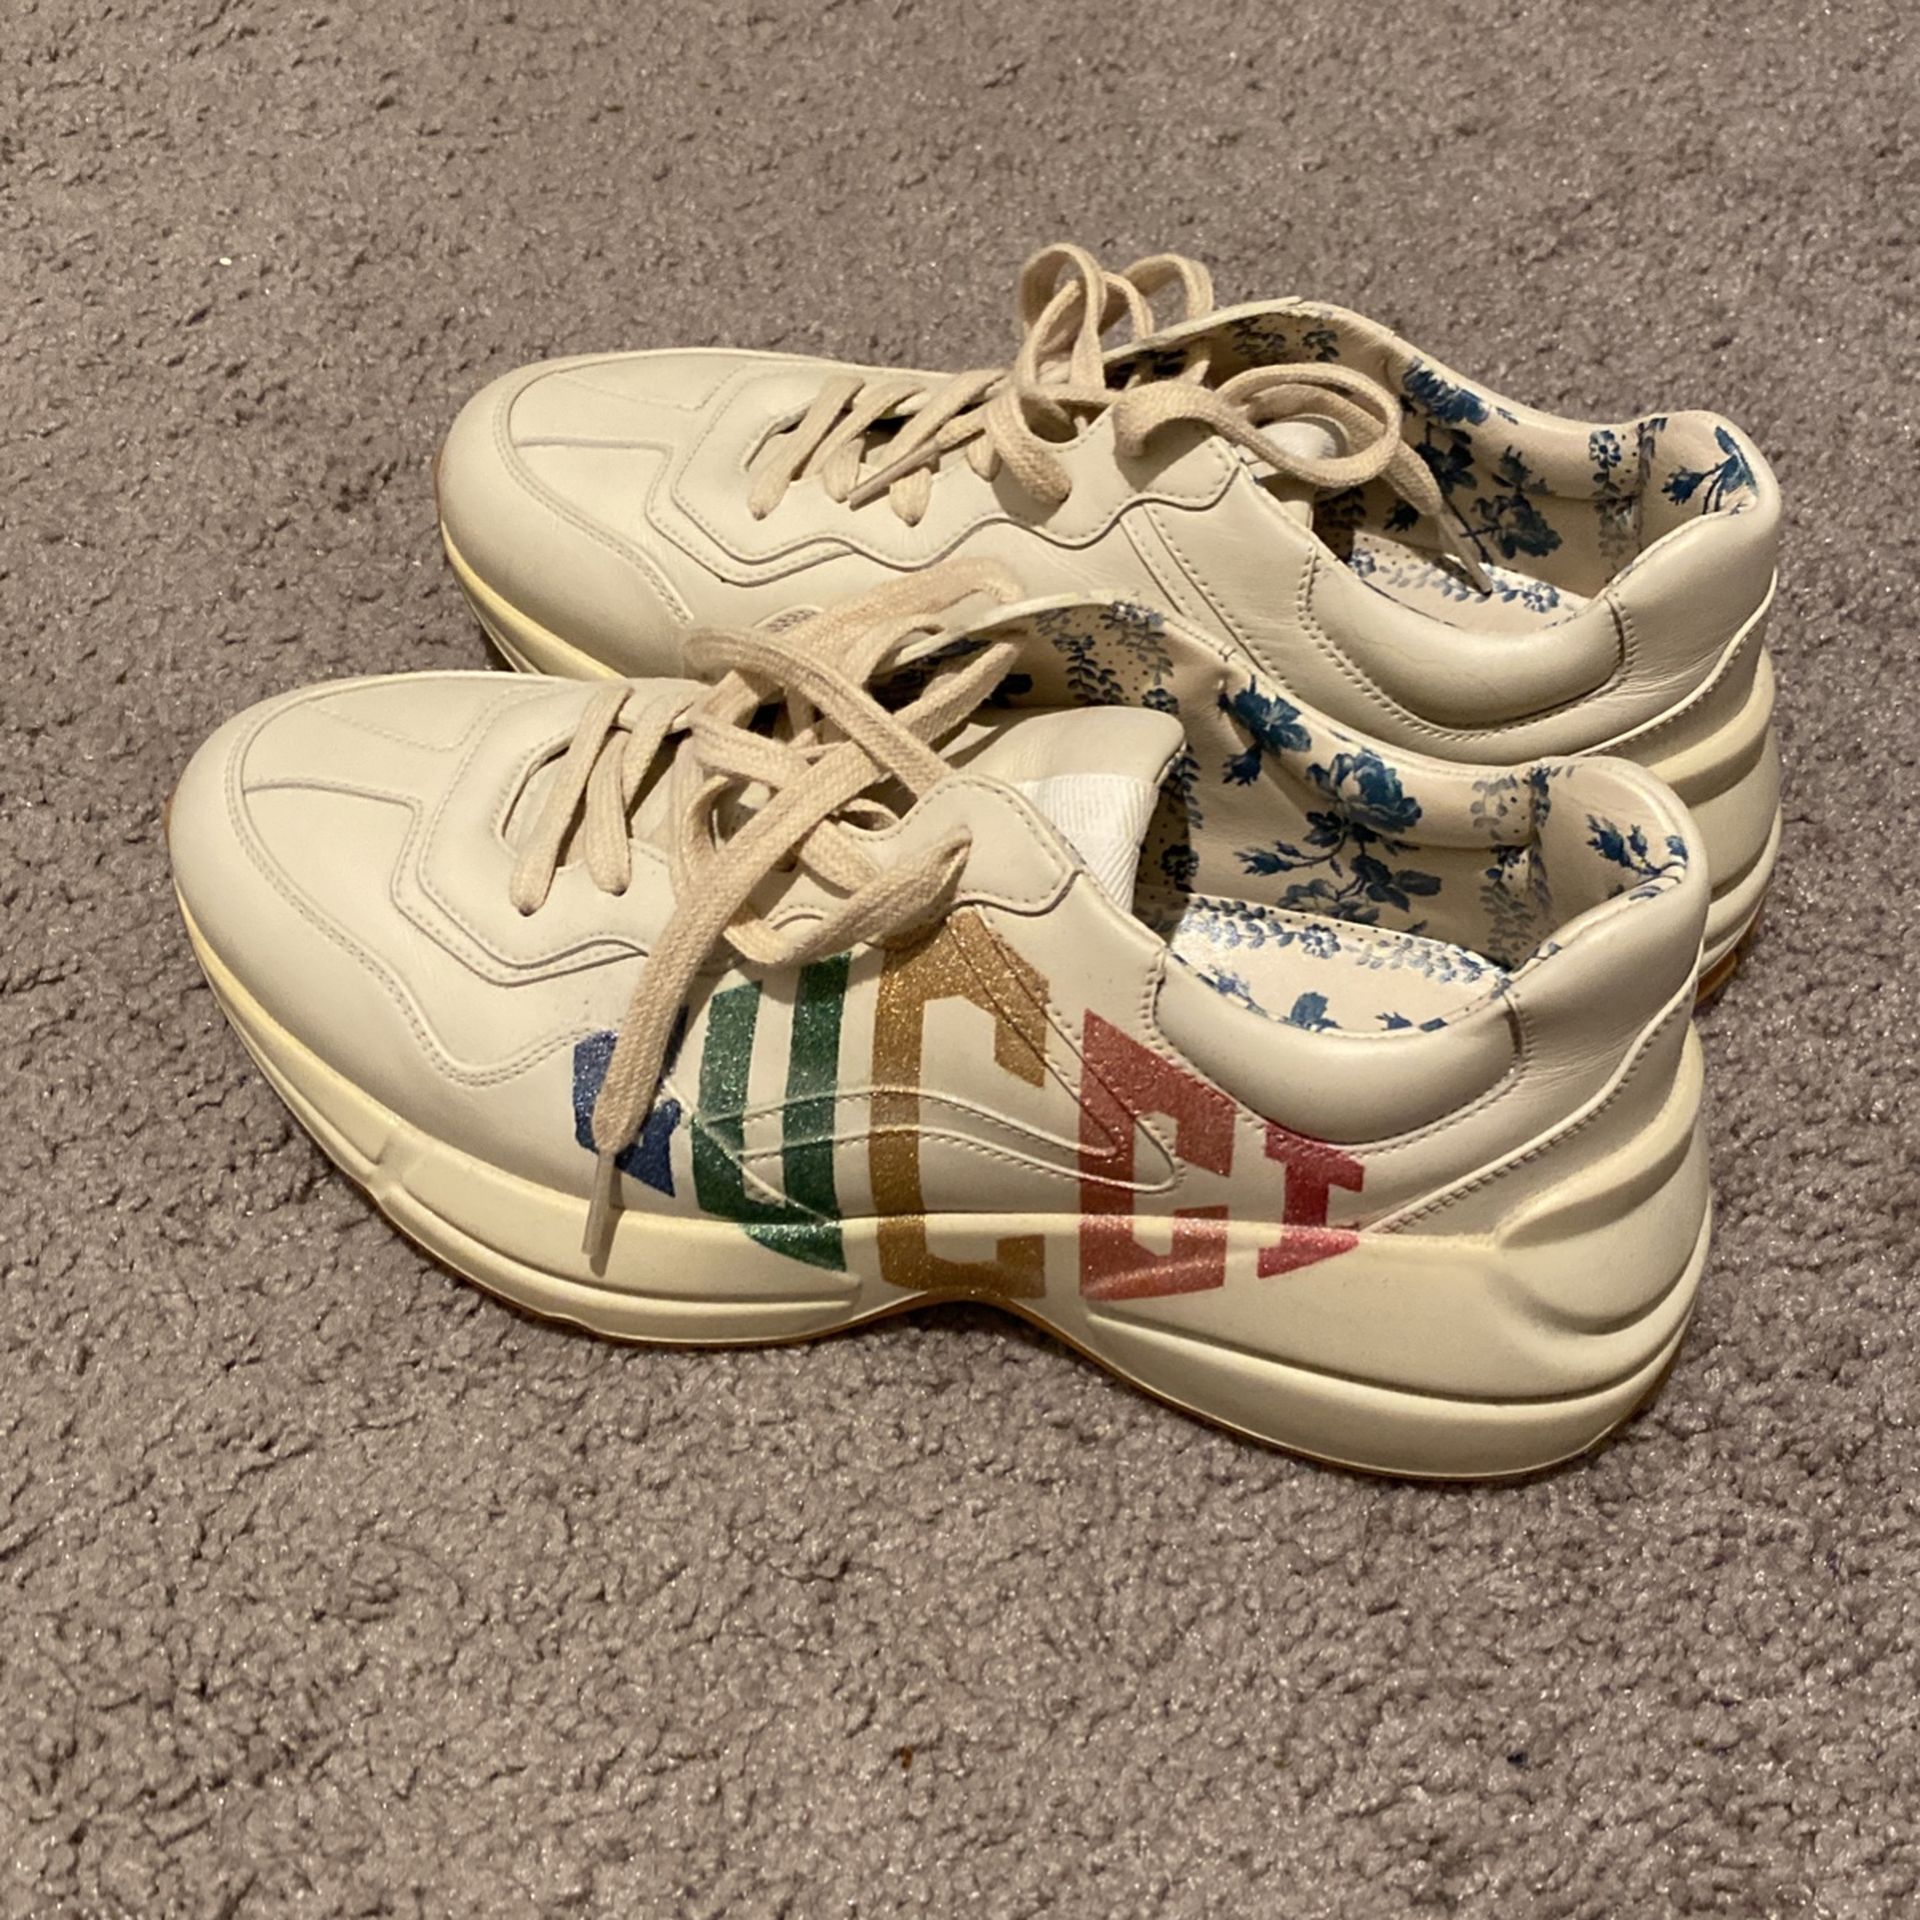 Gucci Rython Rainbow Leather Sneakers Size 10 1/2